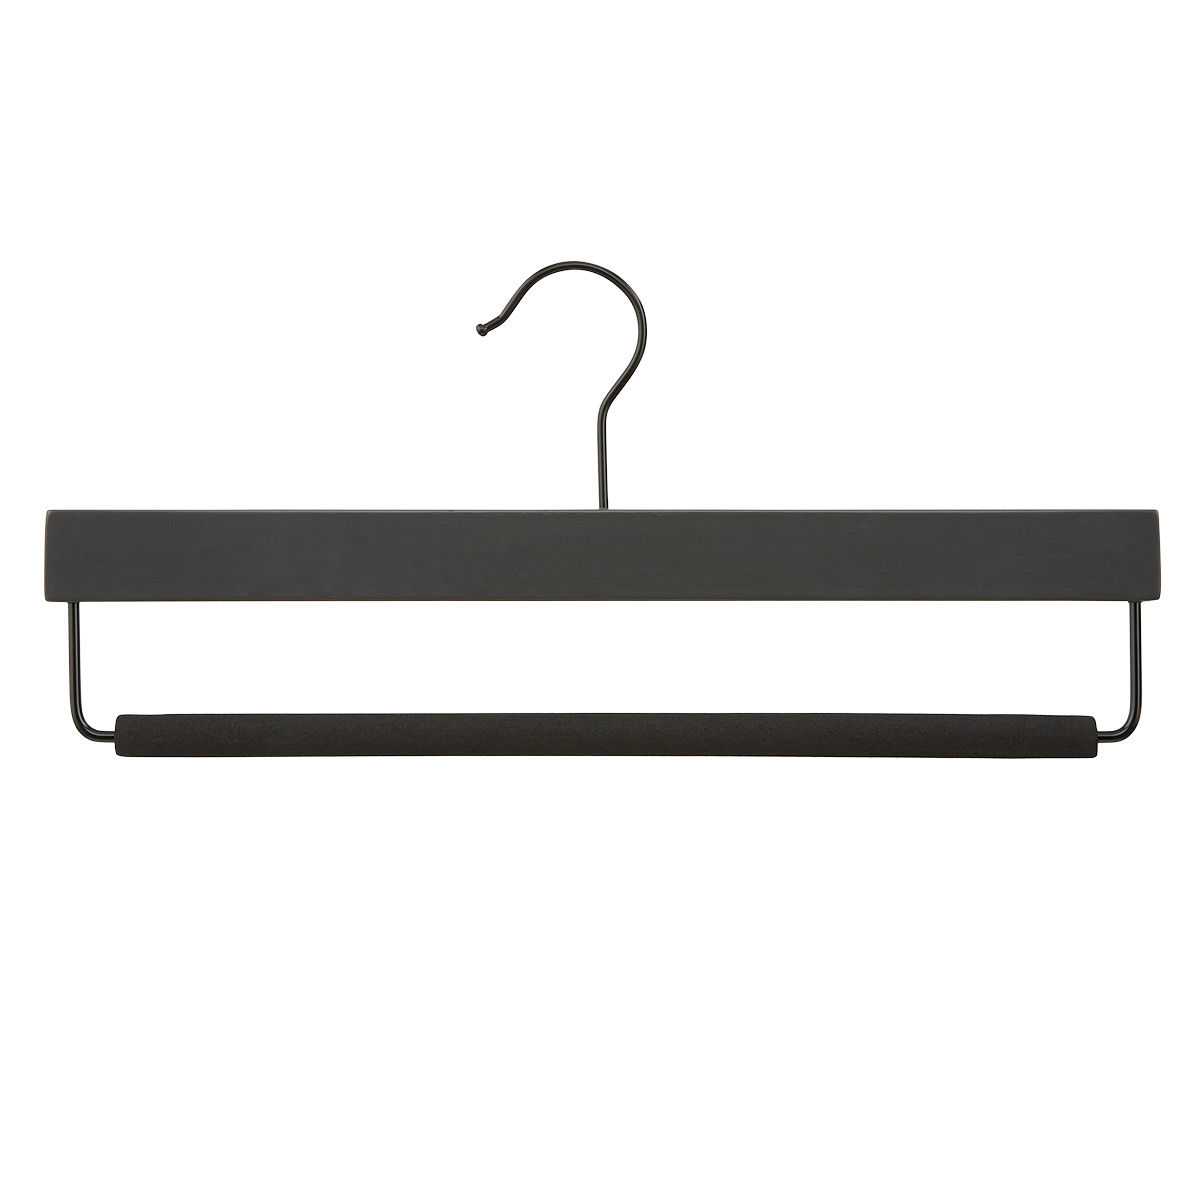 https://www.containerstore.com/catalogimages/409518/10083707_wooden_trouser_hanger_with_.jpg